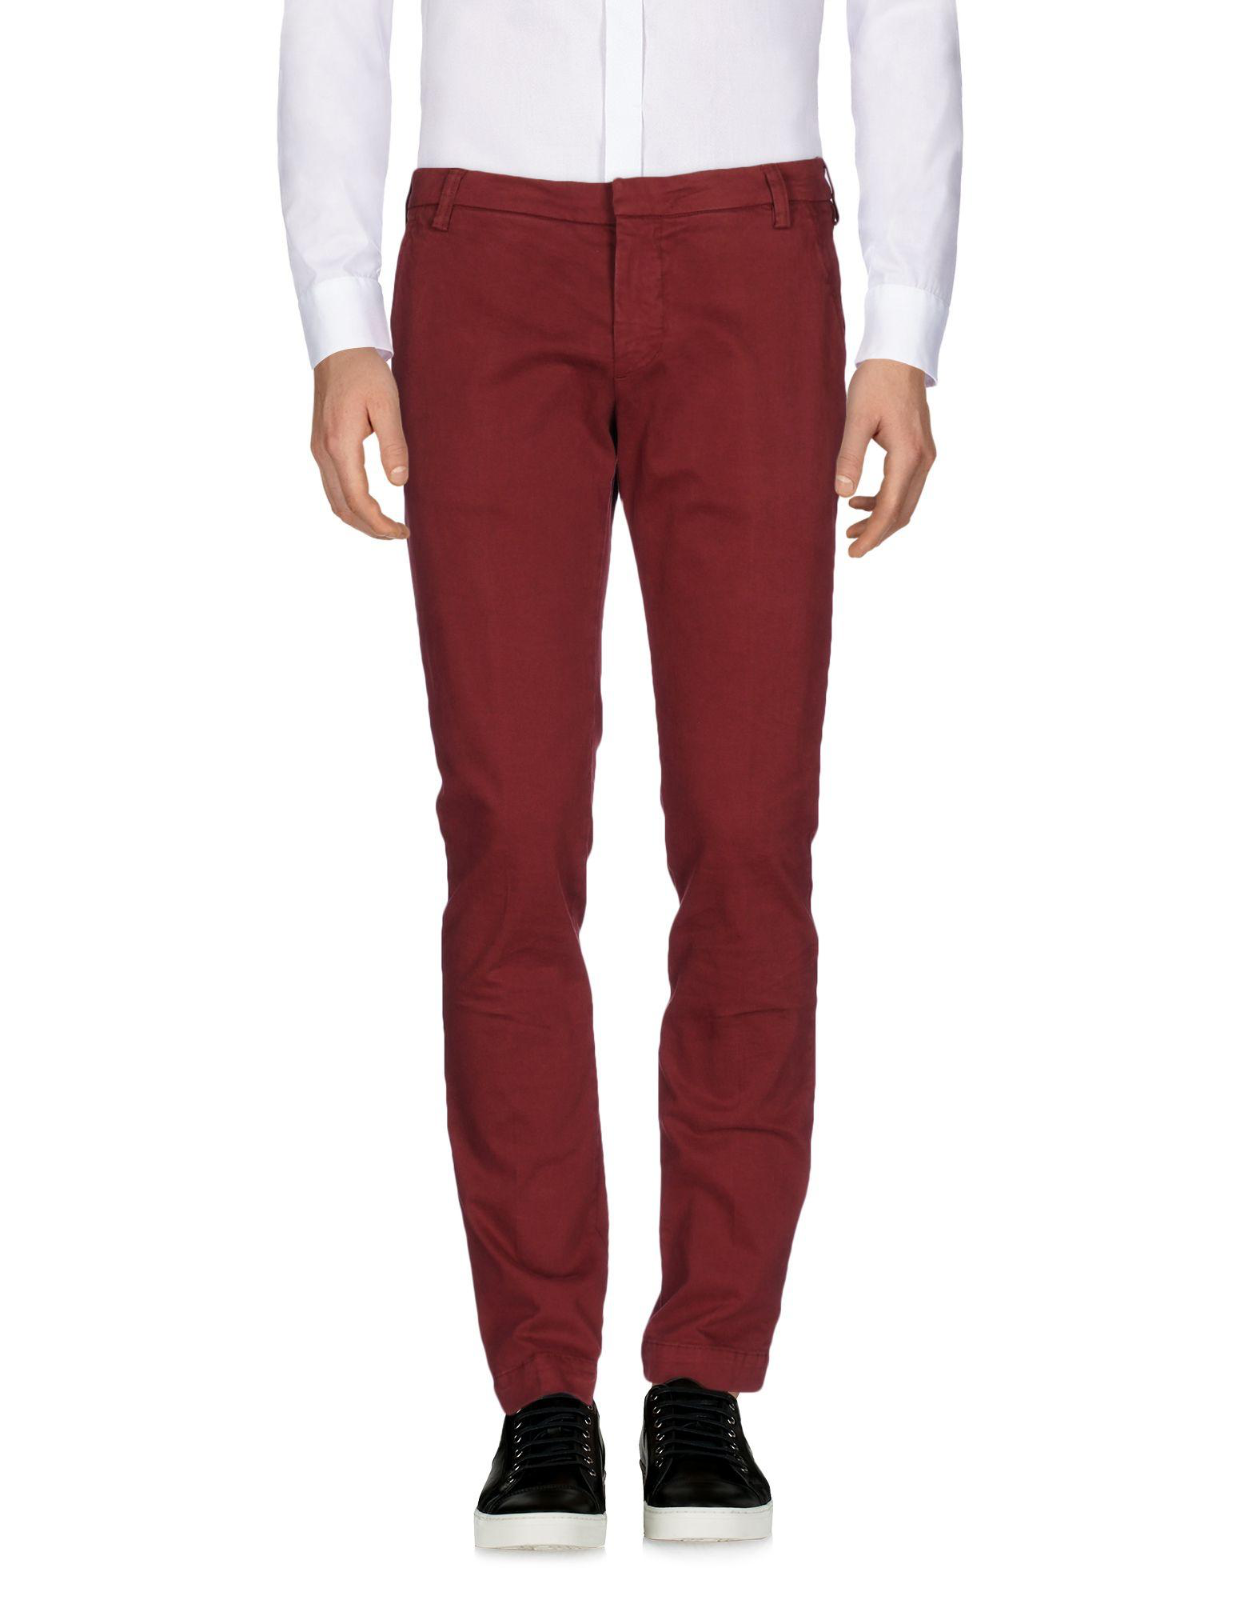 ENTRE AMIS Casual Pants in Maroon L - Outlet Designers